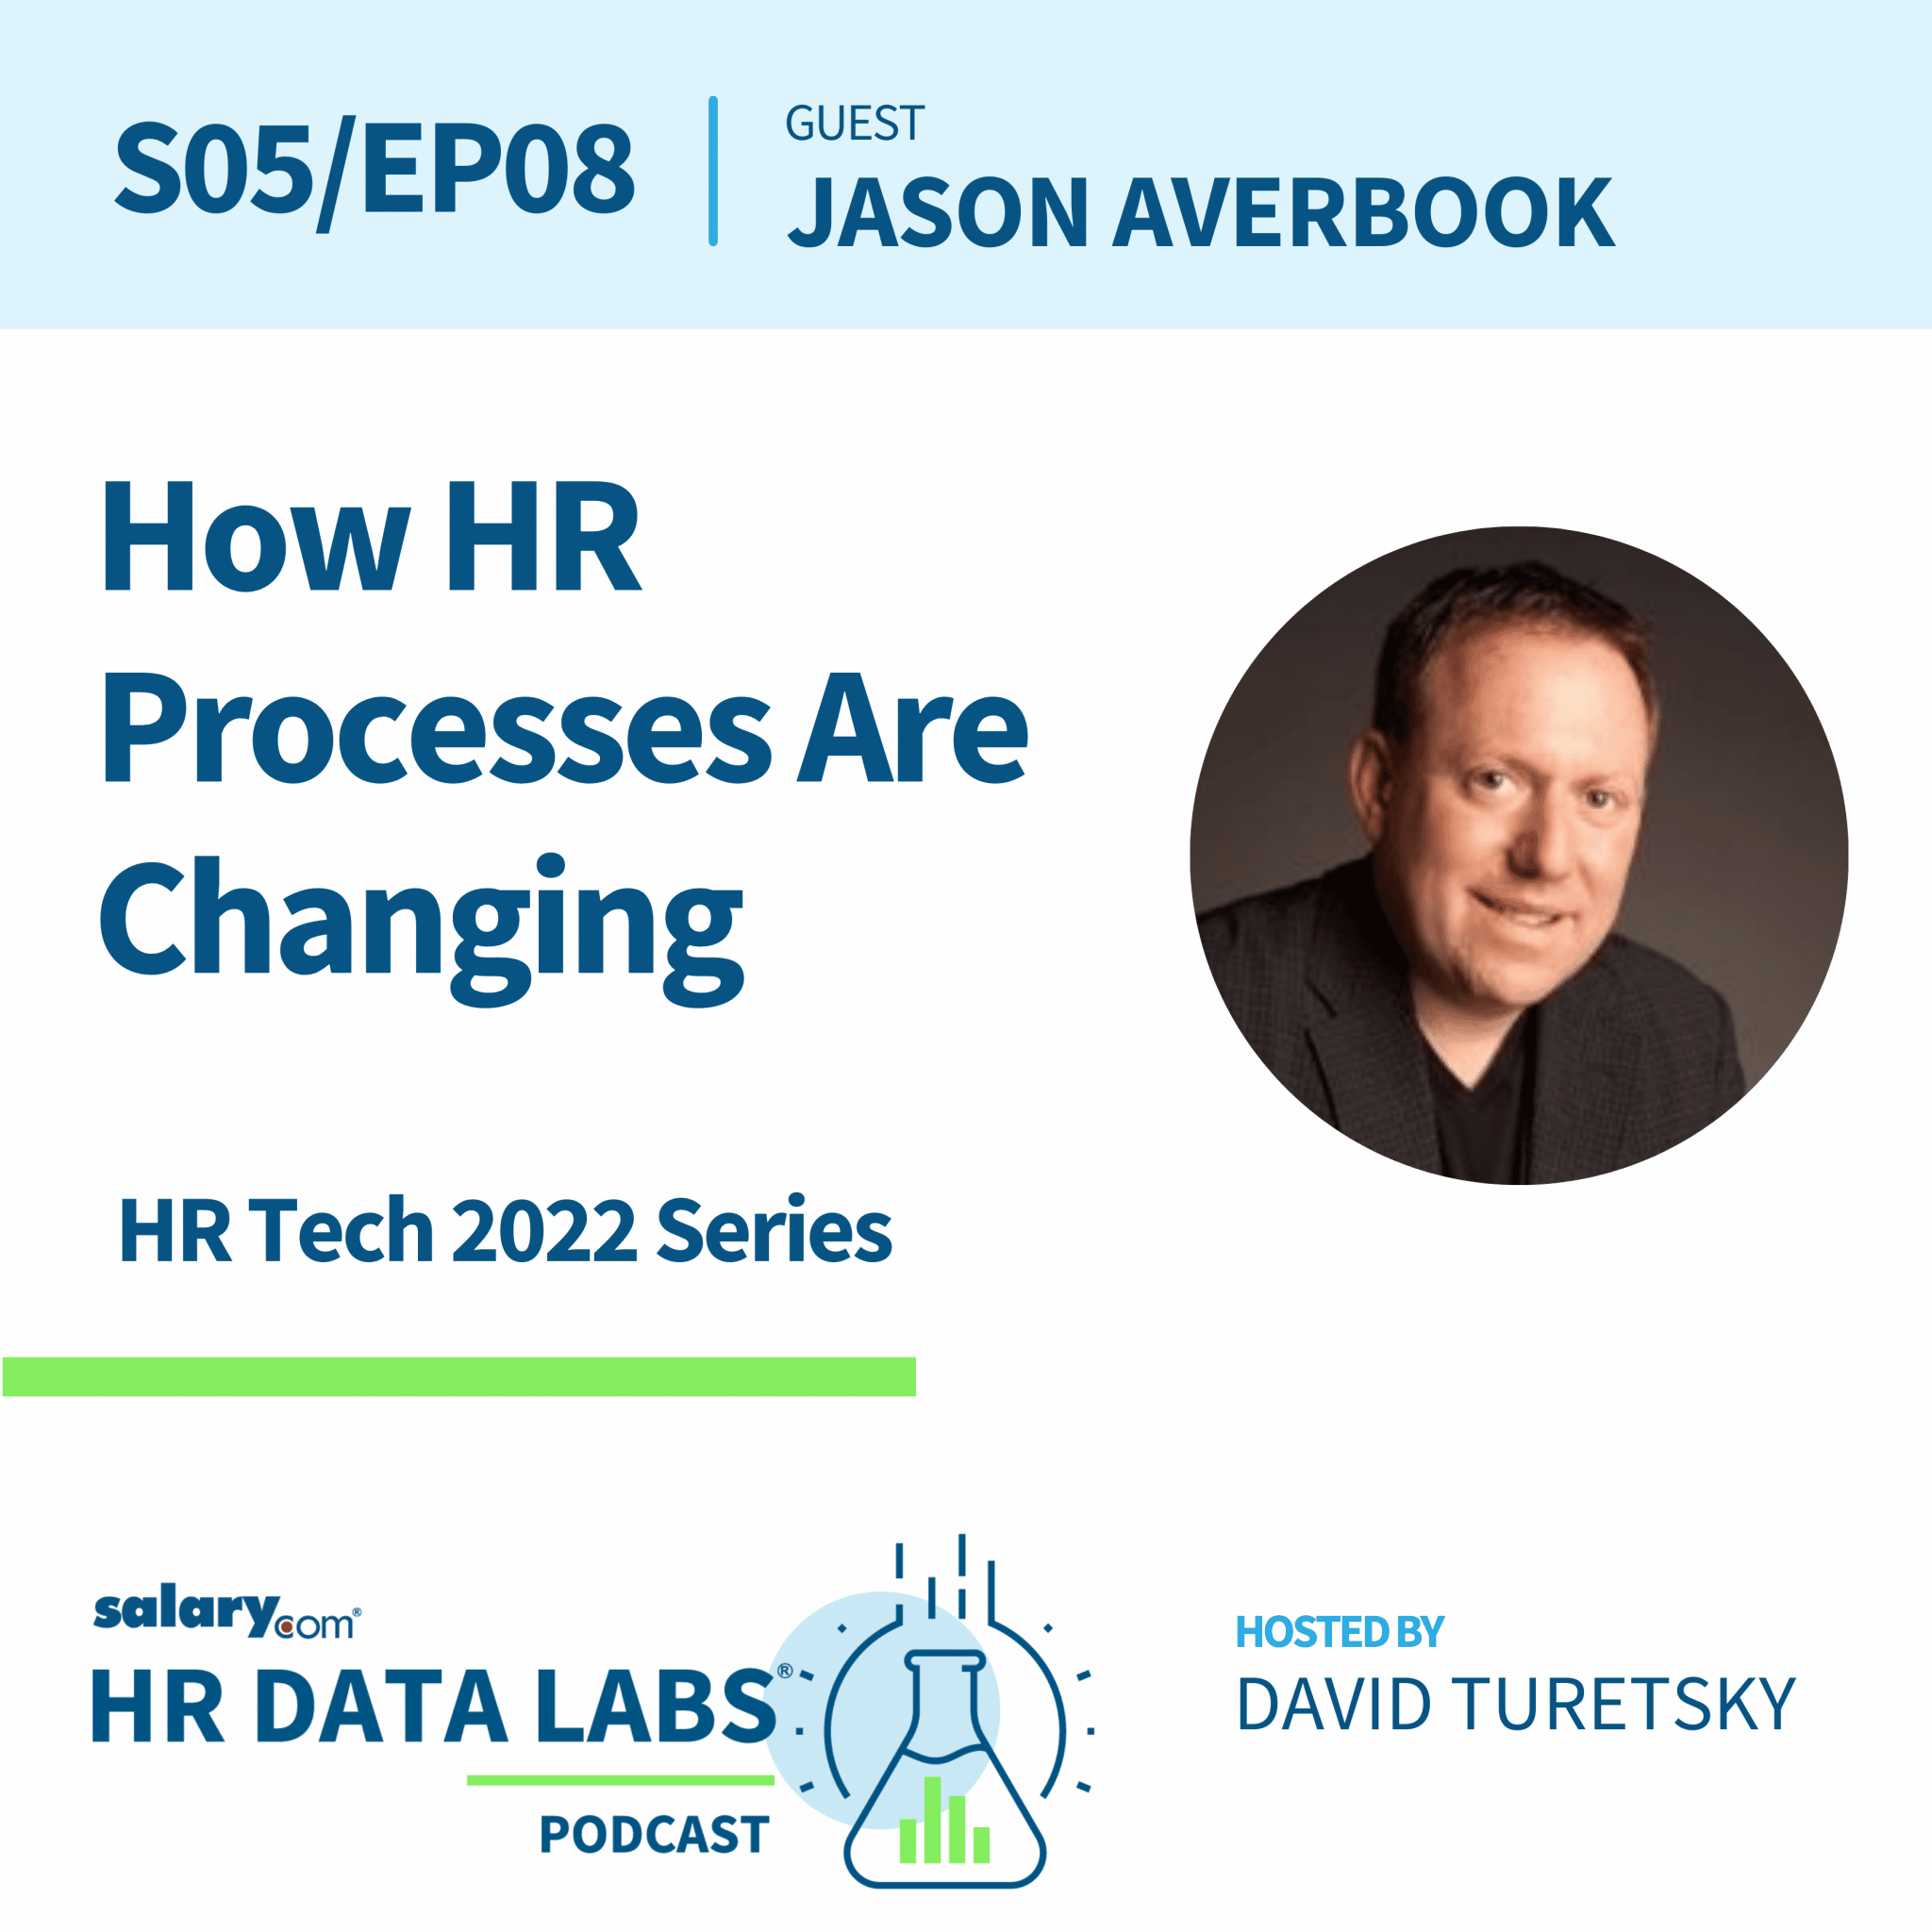 Jason Averbook – HR Tech 2022 Series – How HR Processes Are Changing